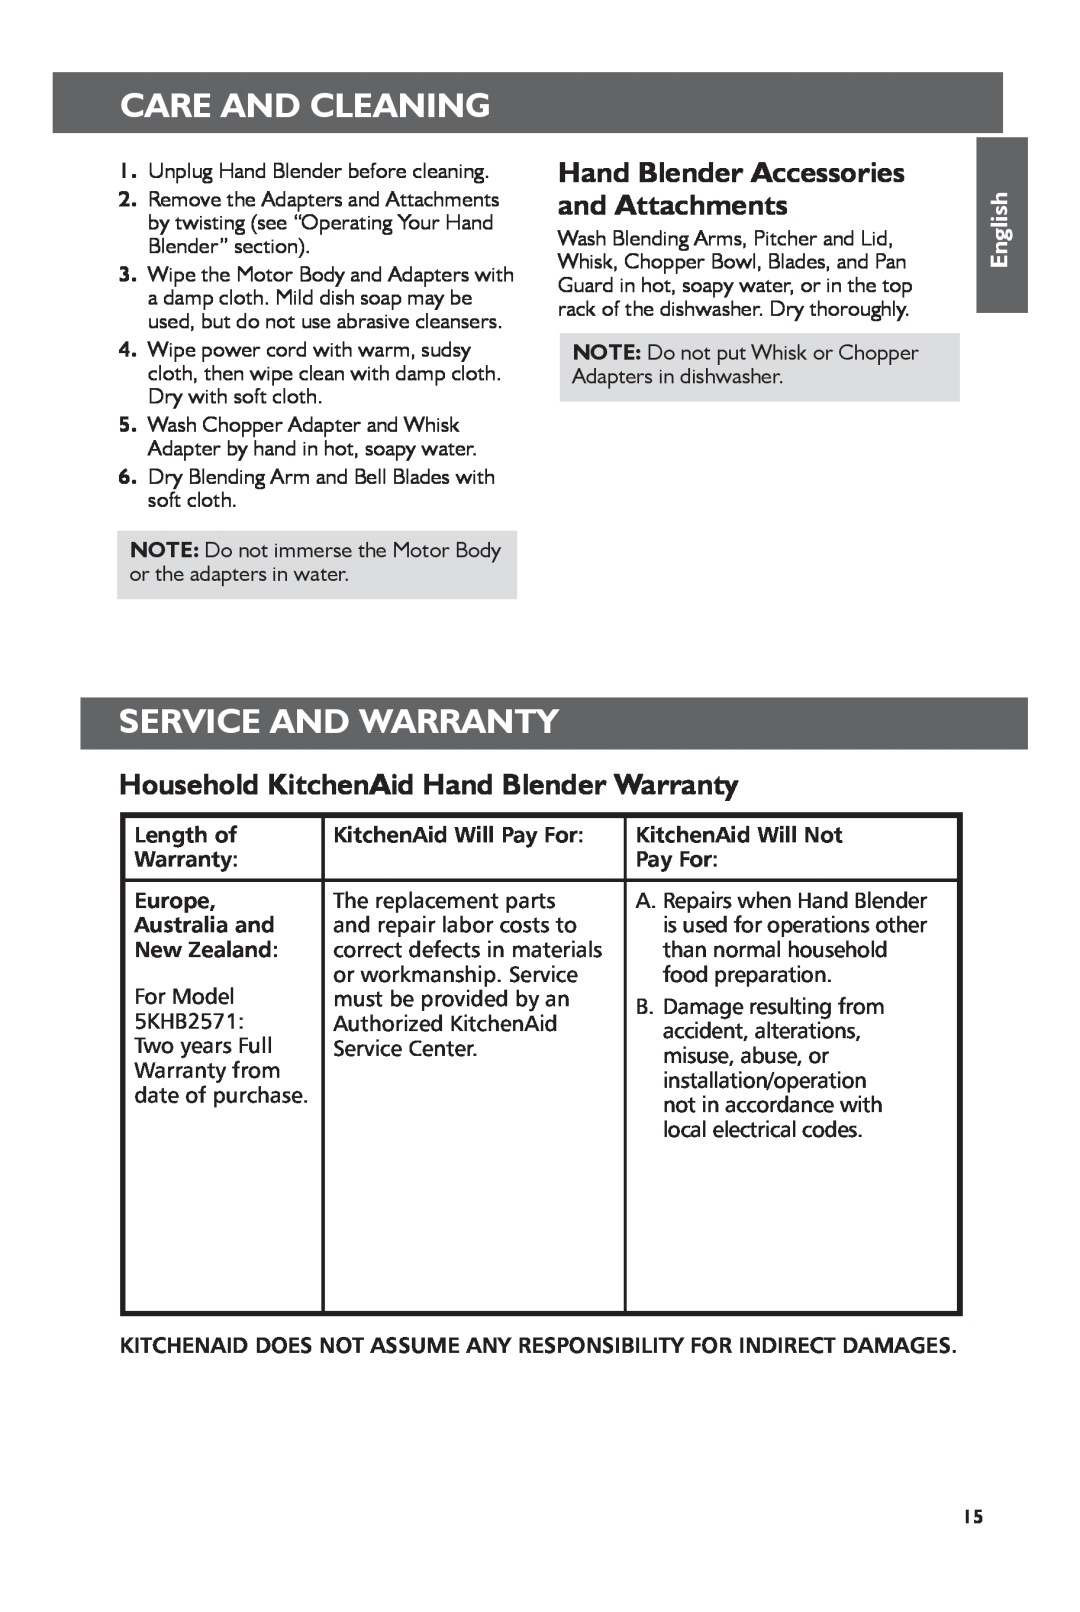 KitchenAid 5KHB2571 manual Care and Cleaning, Service and Warranty, Household KitchenAid Hand Blender Warranty, English 